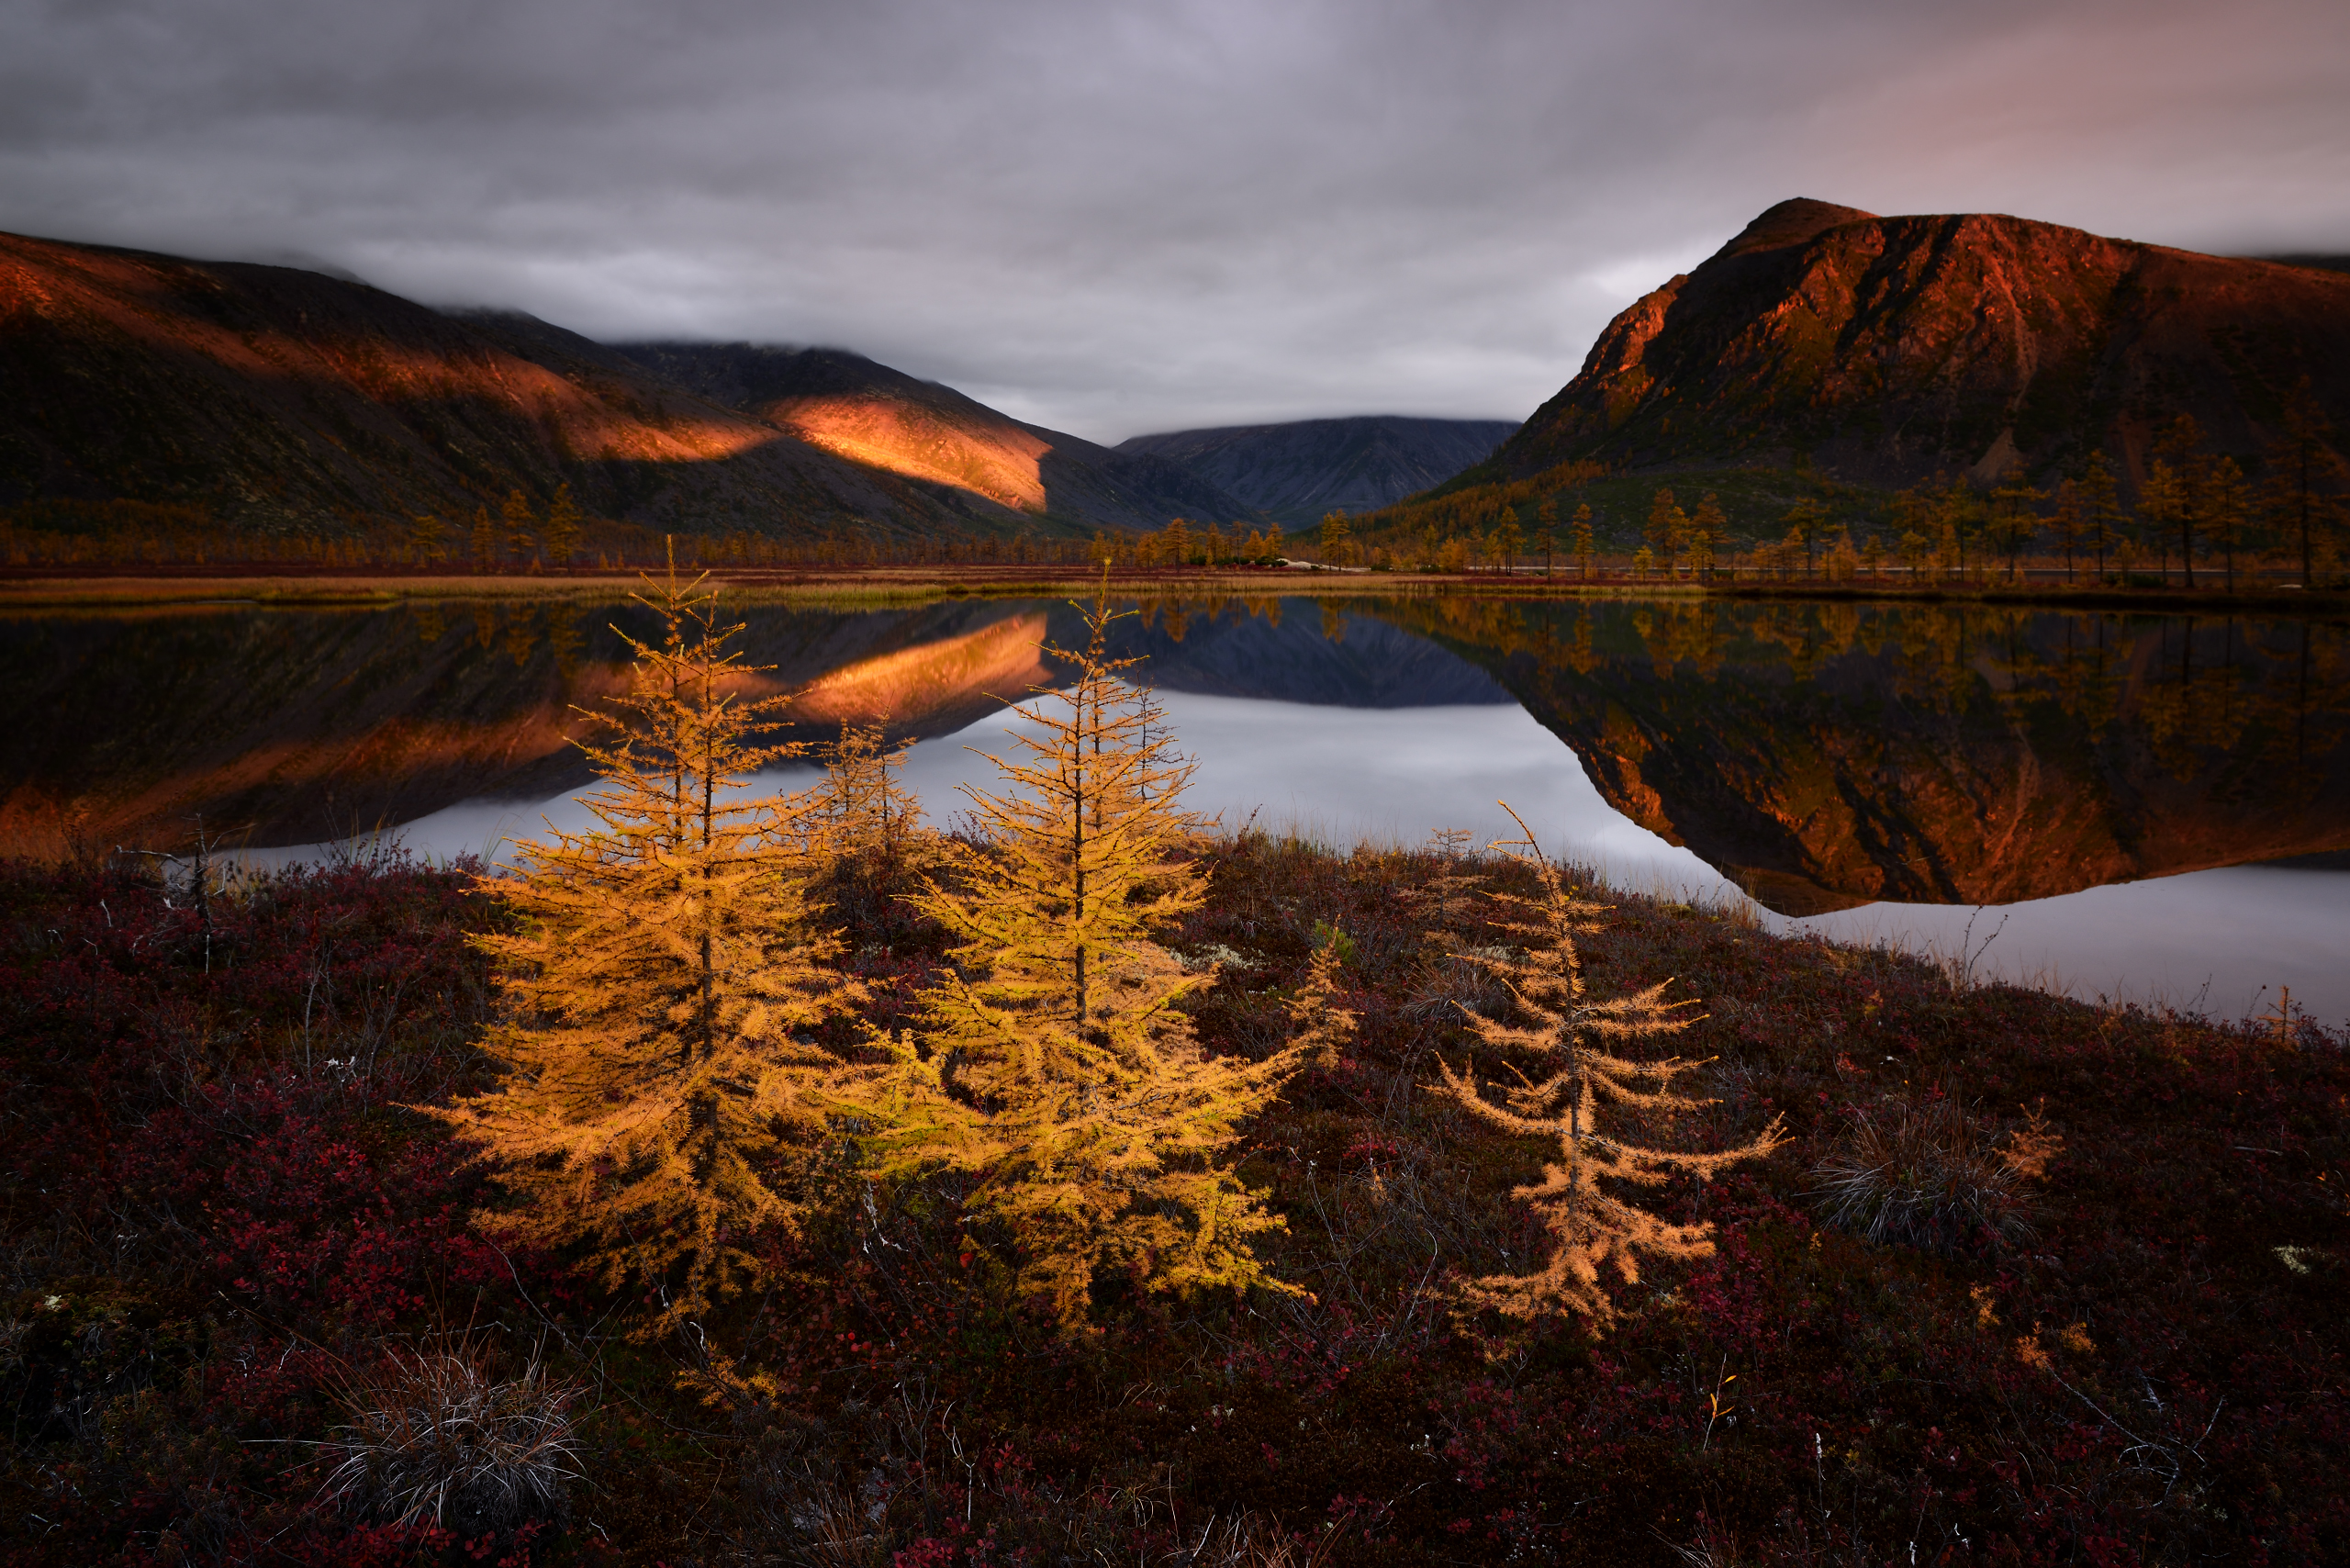 Russia Lake Landscape Nature Mirrored Reflection Mountains Clouds Sunset Trees Fall Photography Maxi 2560x1708